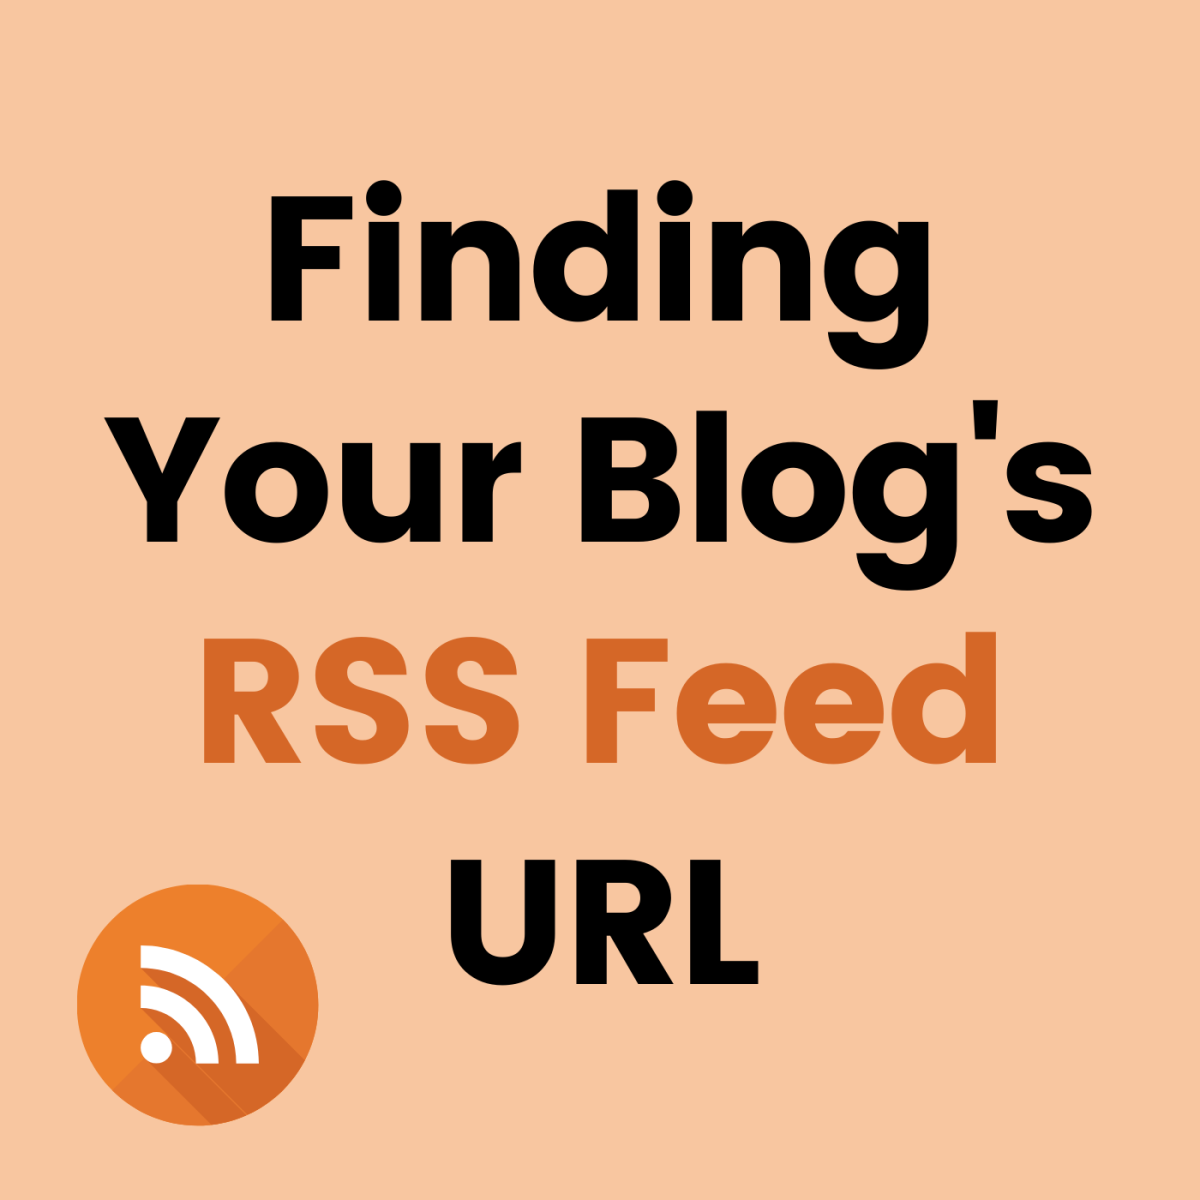 How to Find Your Blog's RSS Feed URL